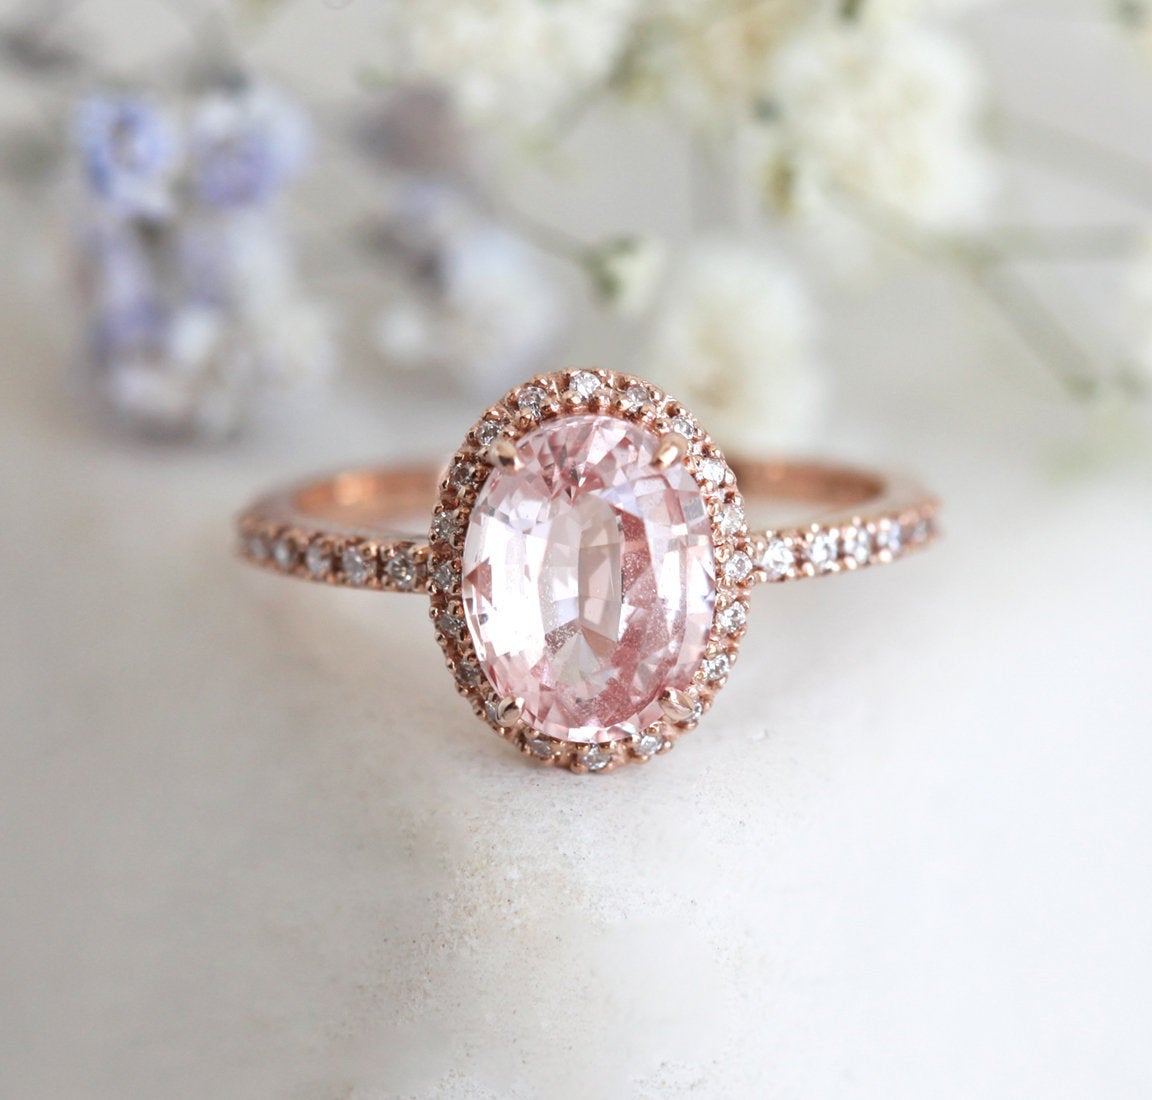 Oval-shaped peach sapphire ring with diamond halo